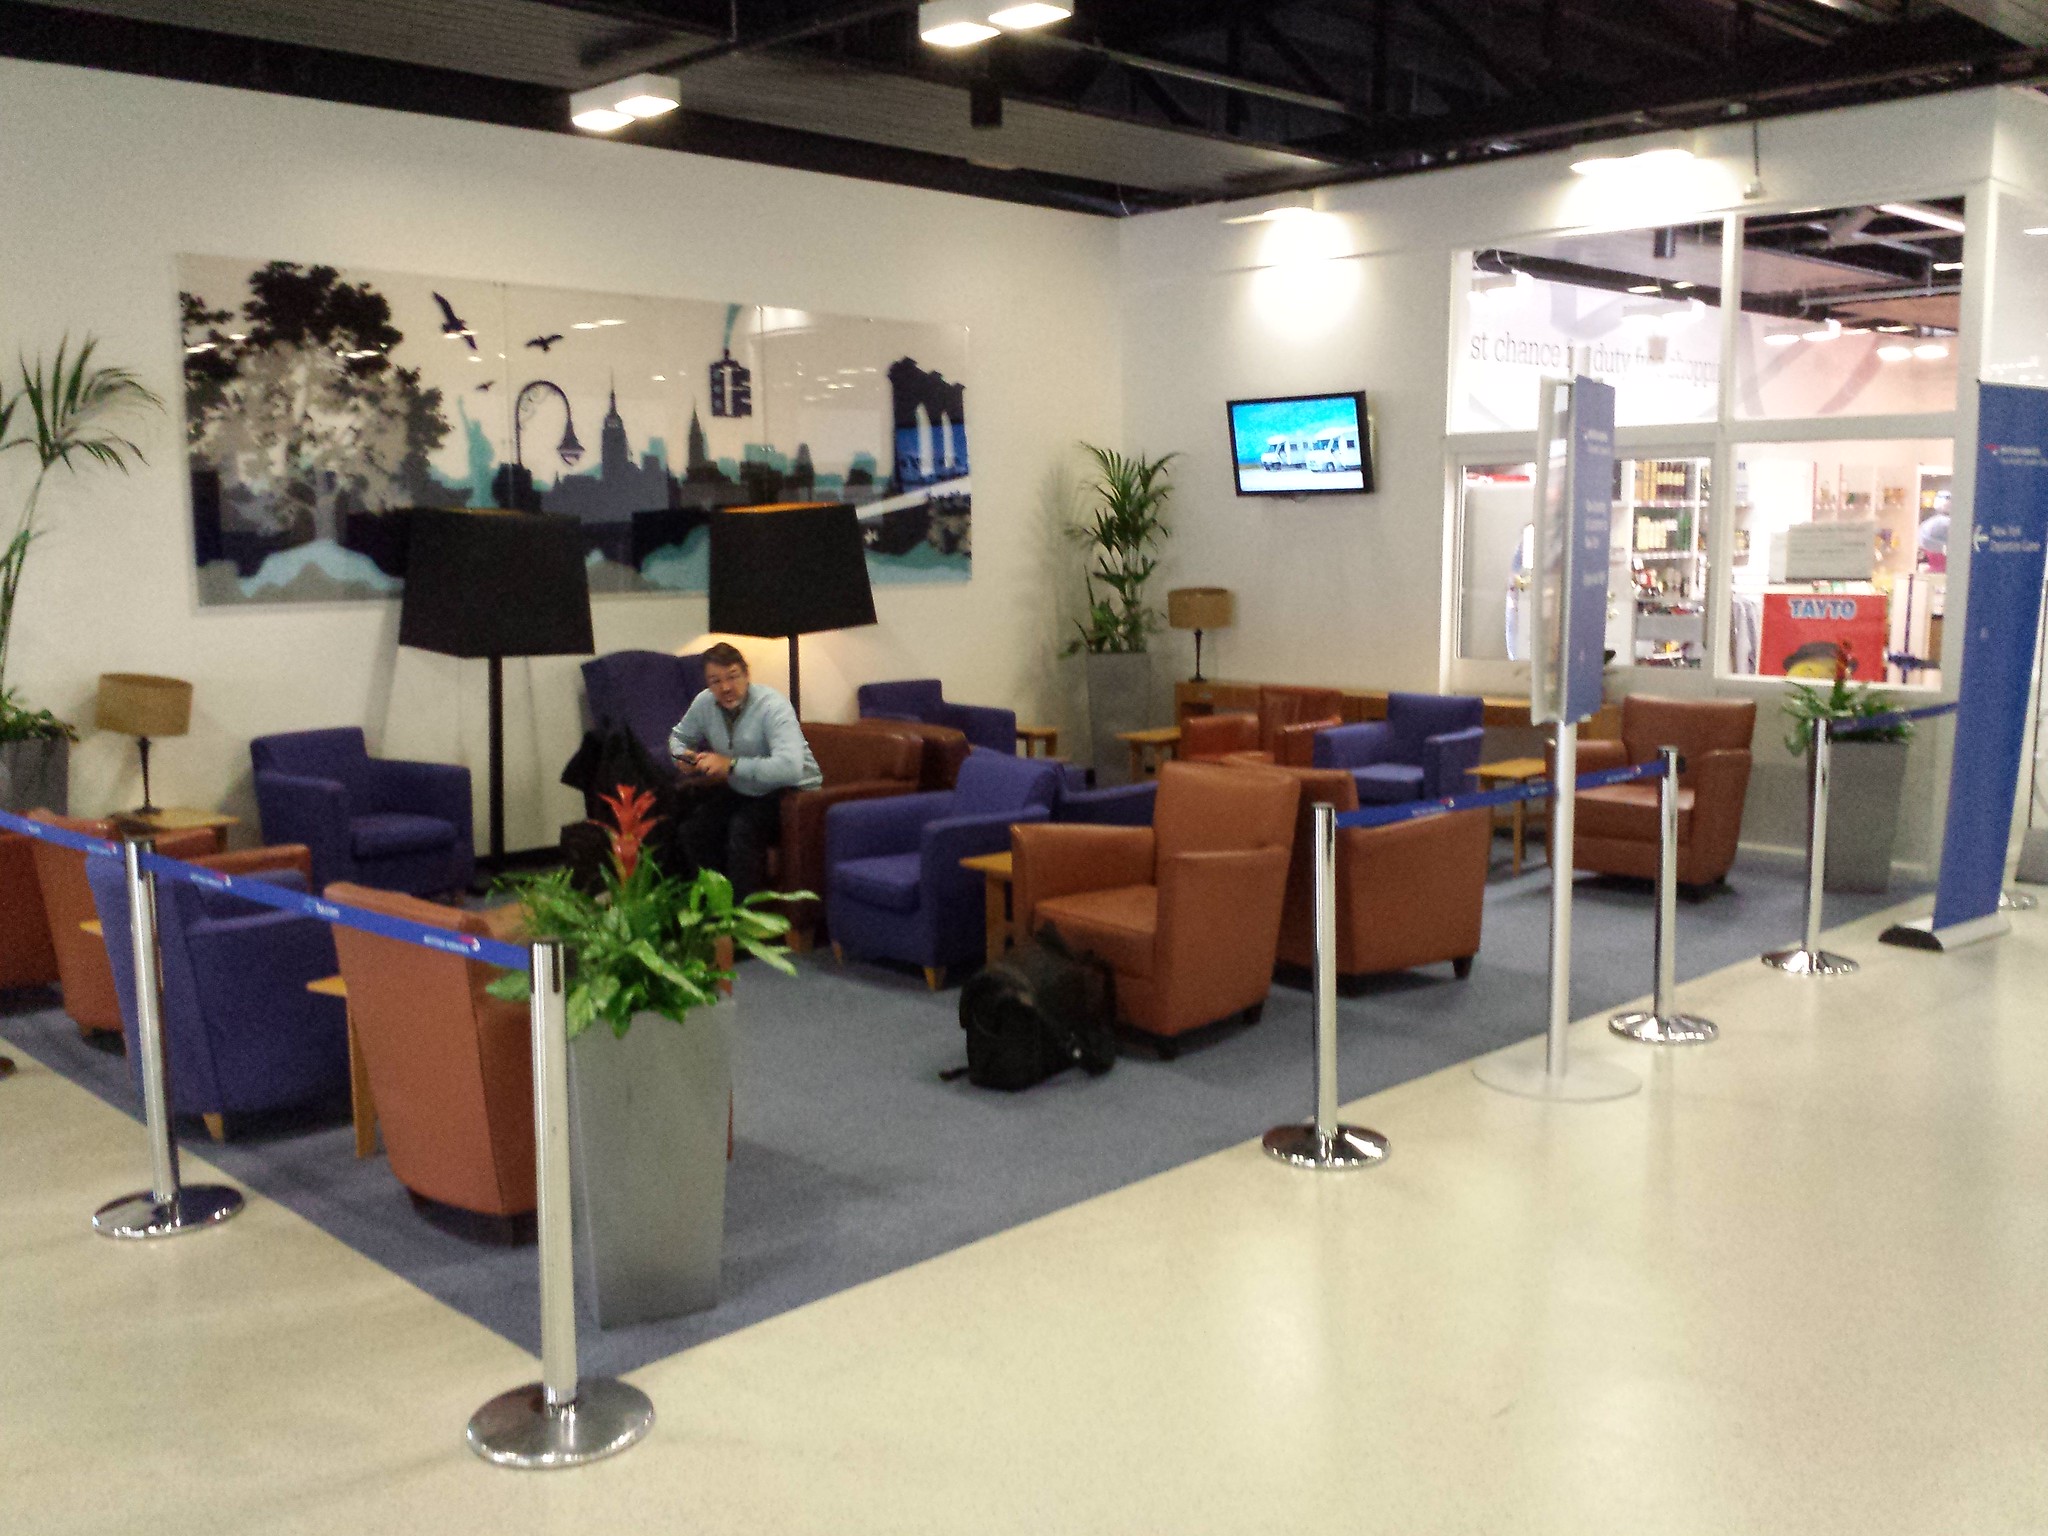 The waiting area at Shannon